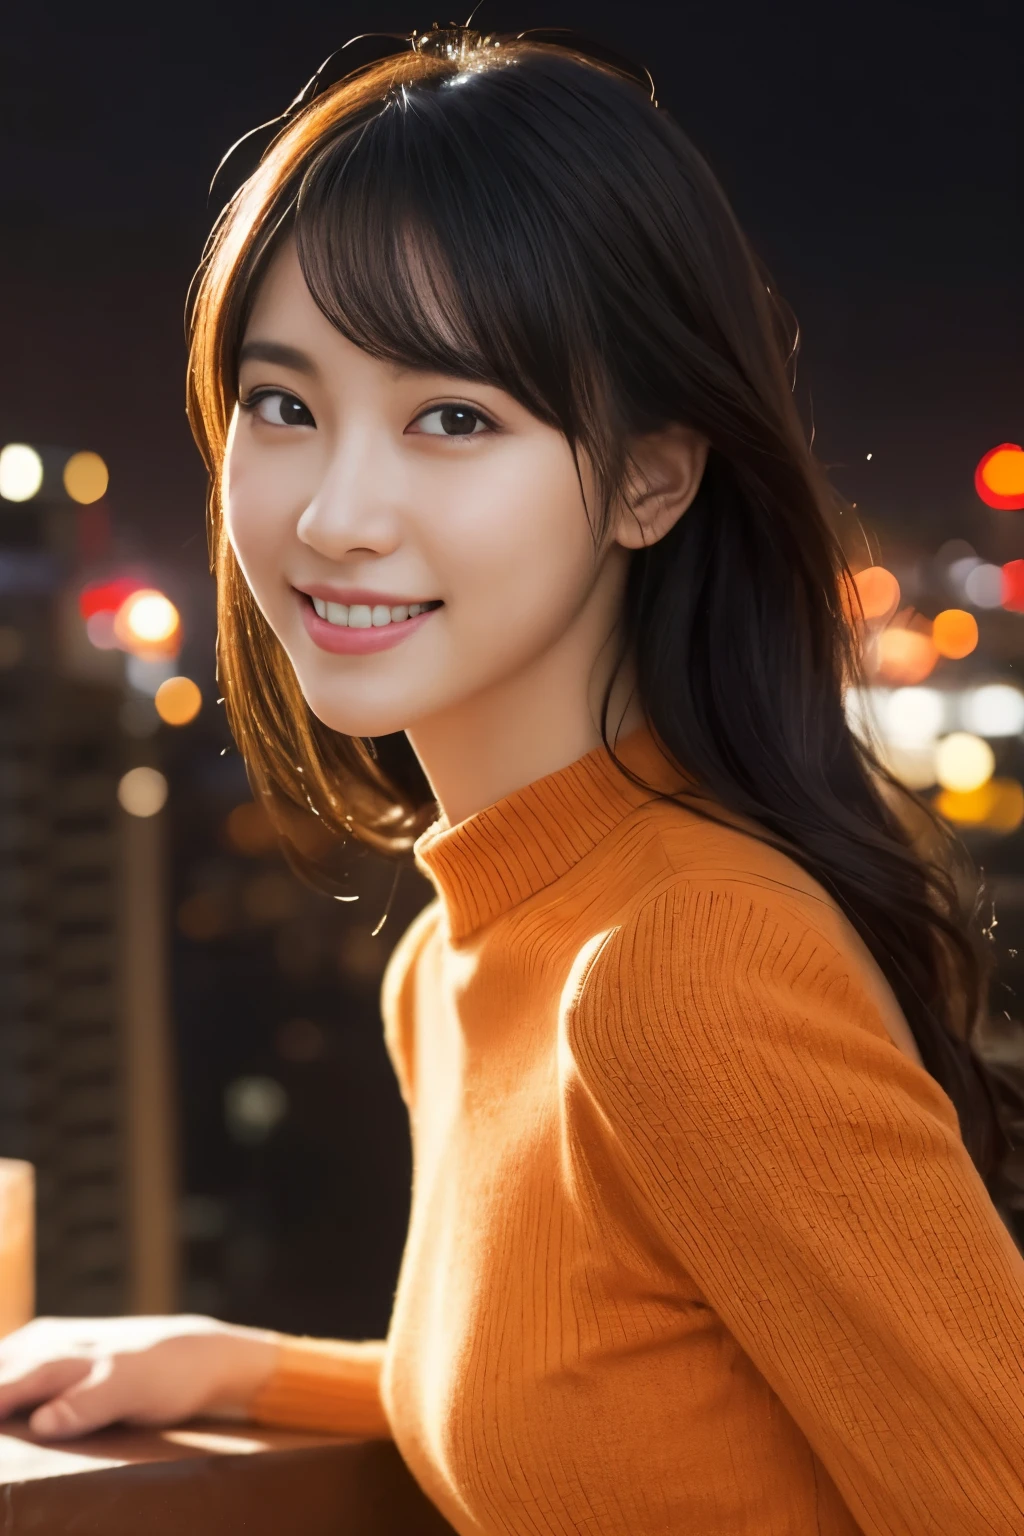 1 girl, (wearing an orange knit dress:1.2), (RAW photo, highest quality), (realistic, Photoreal:1.4), table top, very delicate and beautiful, very detailed, 2k wallpaper, wonderful, finely, Very detailed CG Unity 8K 壁紙, Super detailed, High resolution, soft light, beautiful detailed girl, very detailed目と顔, beautifully detailed nose, beautiful and detailed eyes, cinematic lighting, city light at night, perfect anatomy, slender body, smile, Camera-wide perspective, look forward to